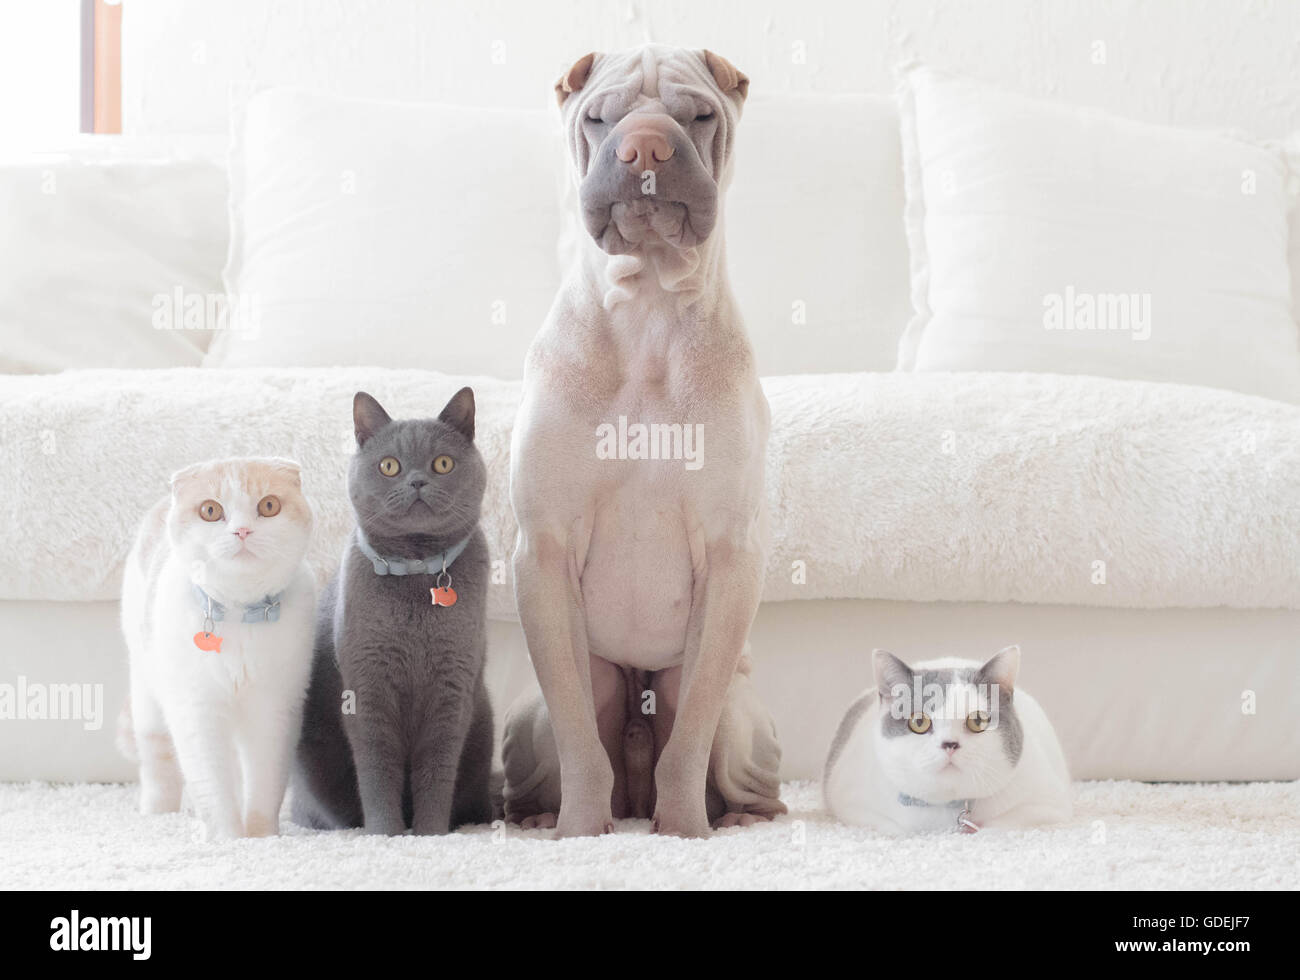 Shar pei dog, british shorthair and scottish fold cats sitting in a row Stock Photo